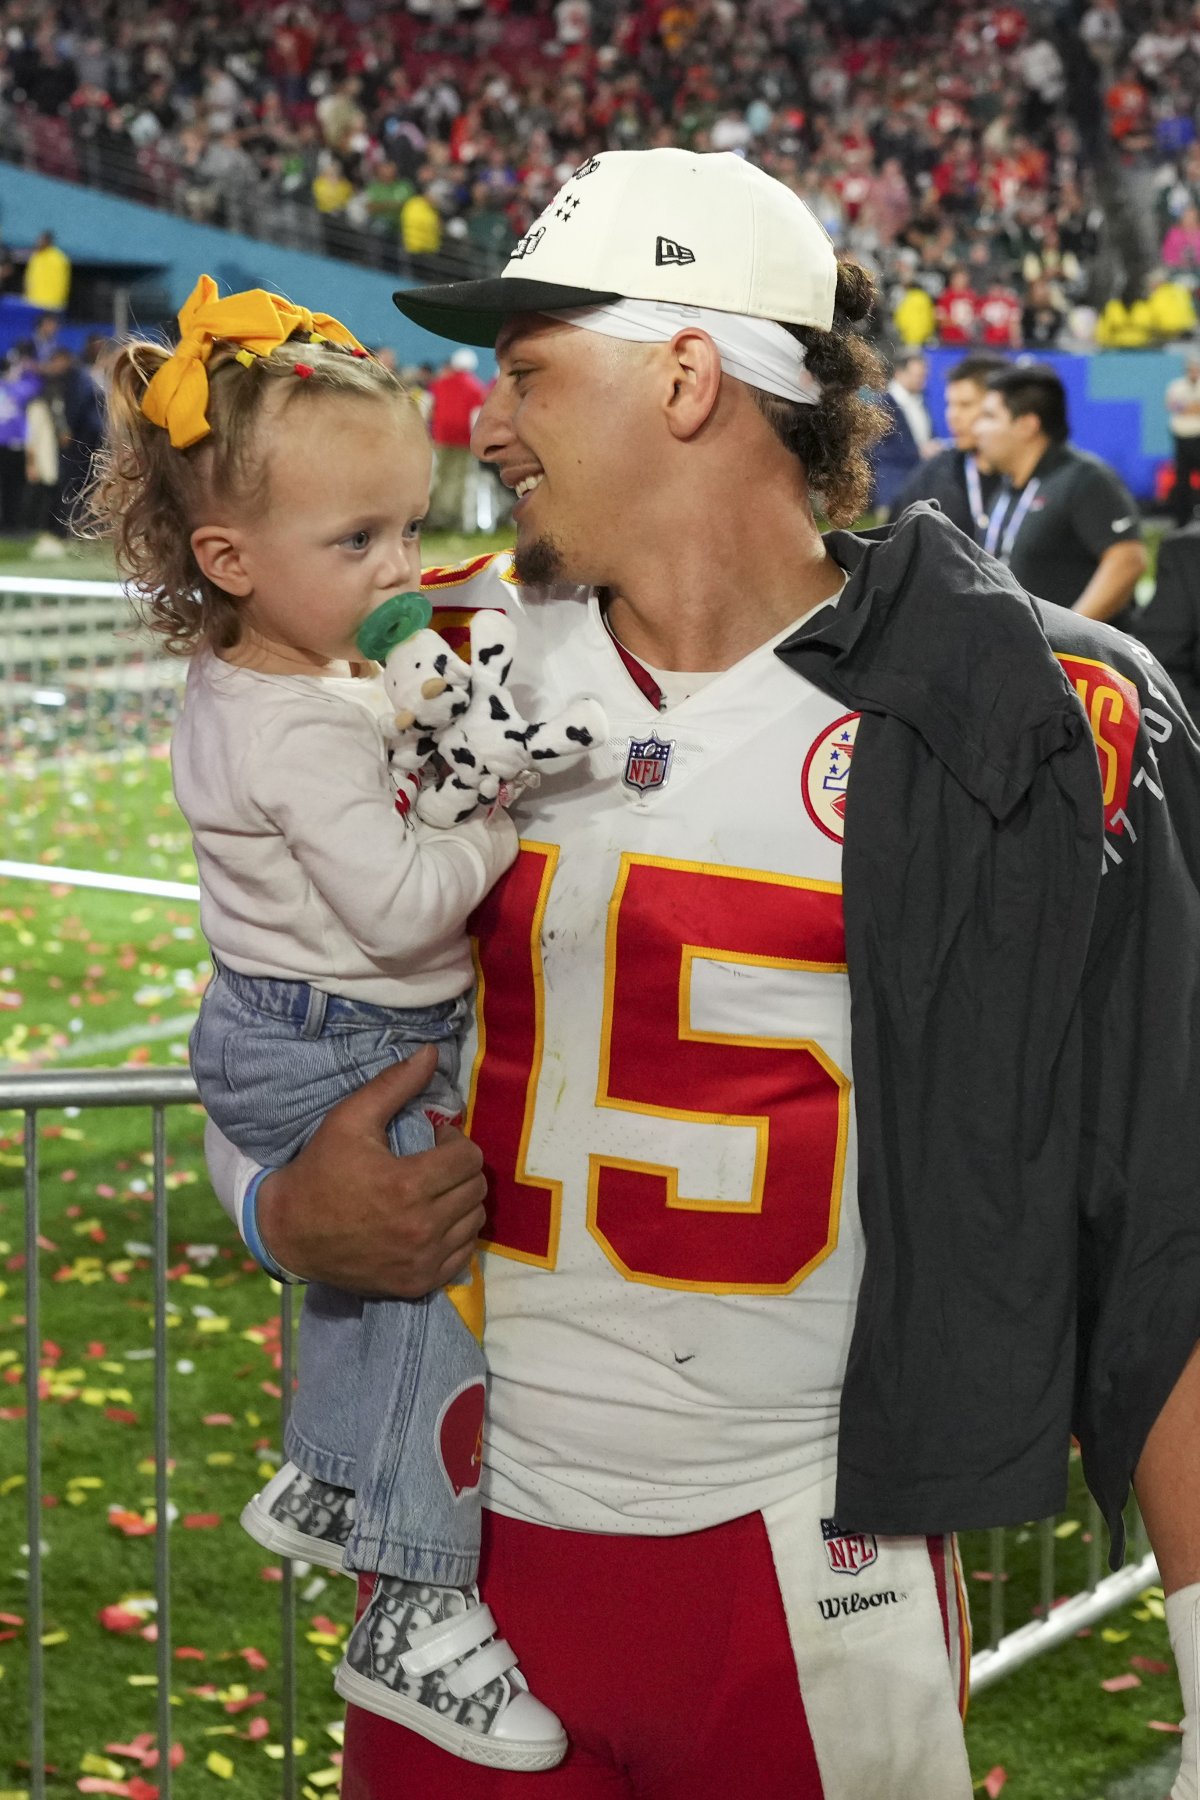 Chiefs super fans thrilled daughter born on Patrick Mahomes